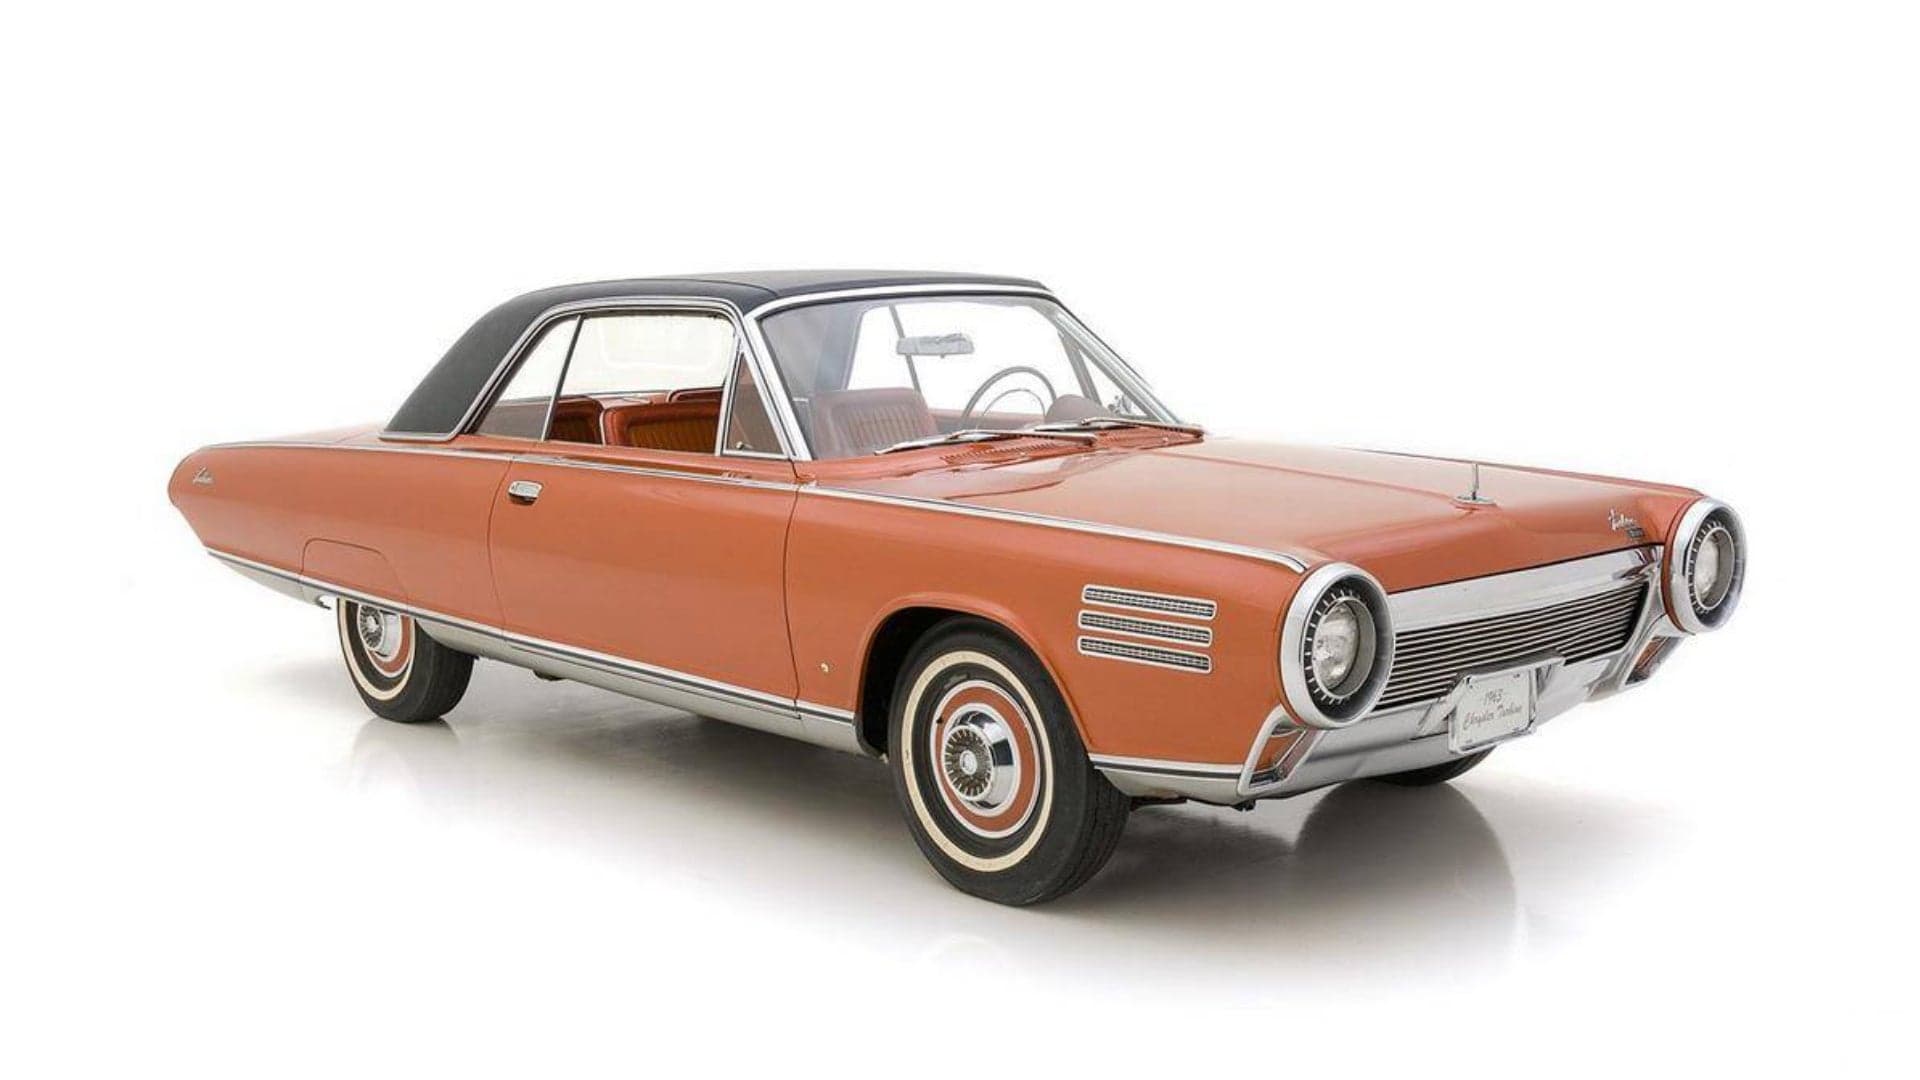 Drop What You’re Doing: There’s a Chrysler Turbine Car for Sale